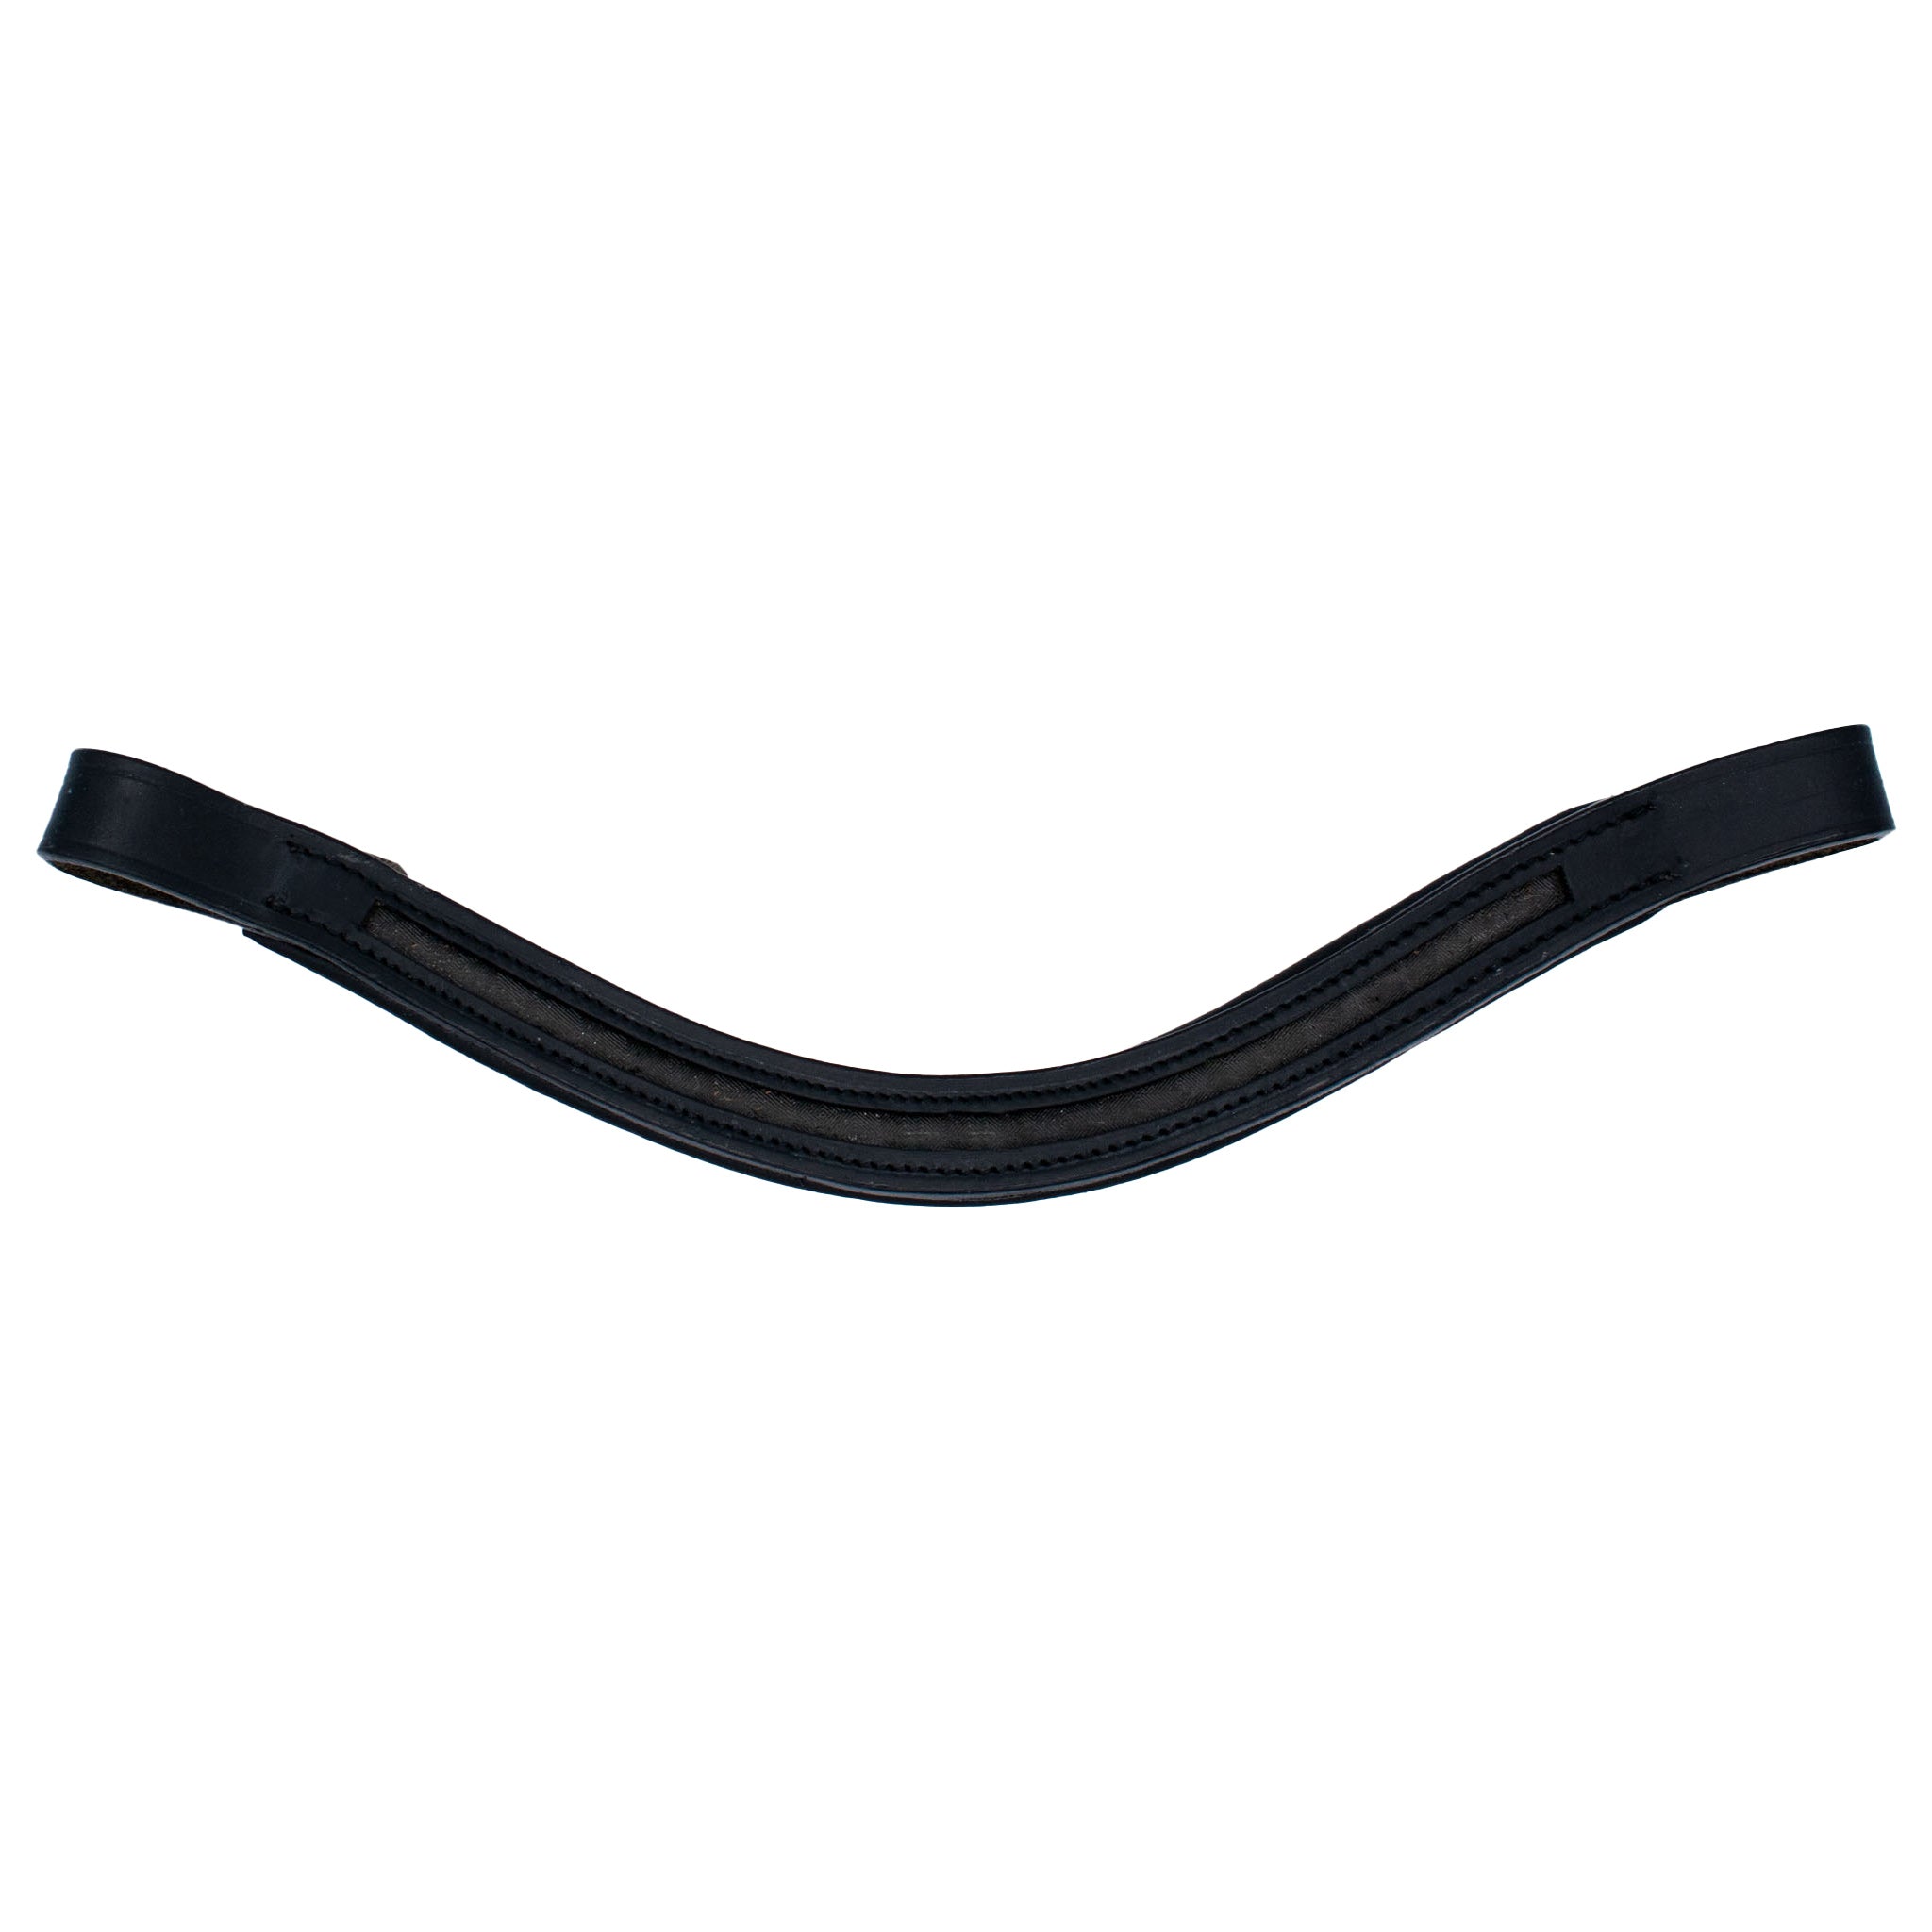 Empty Channel Browband - Curved with 12mm channel